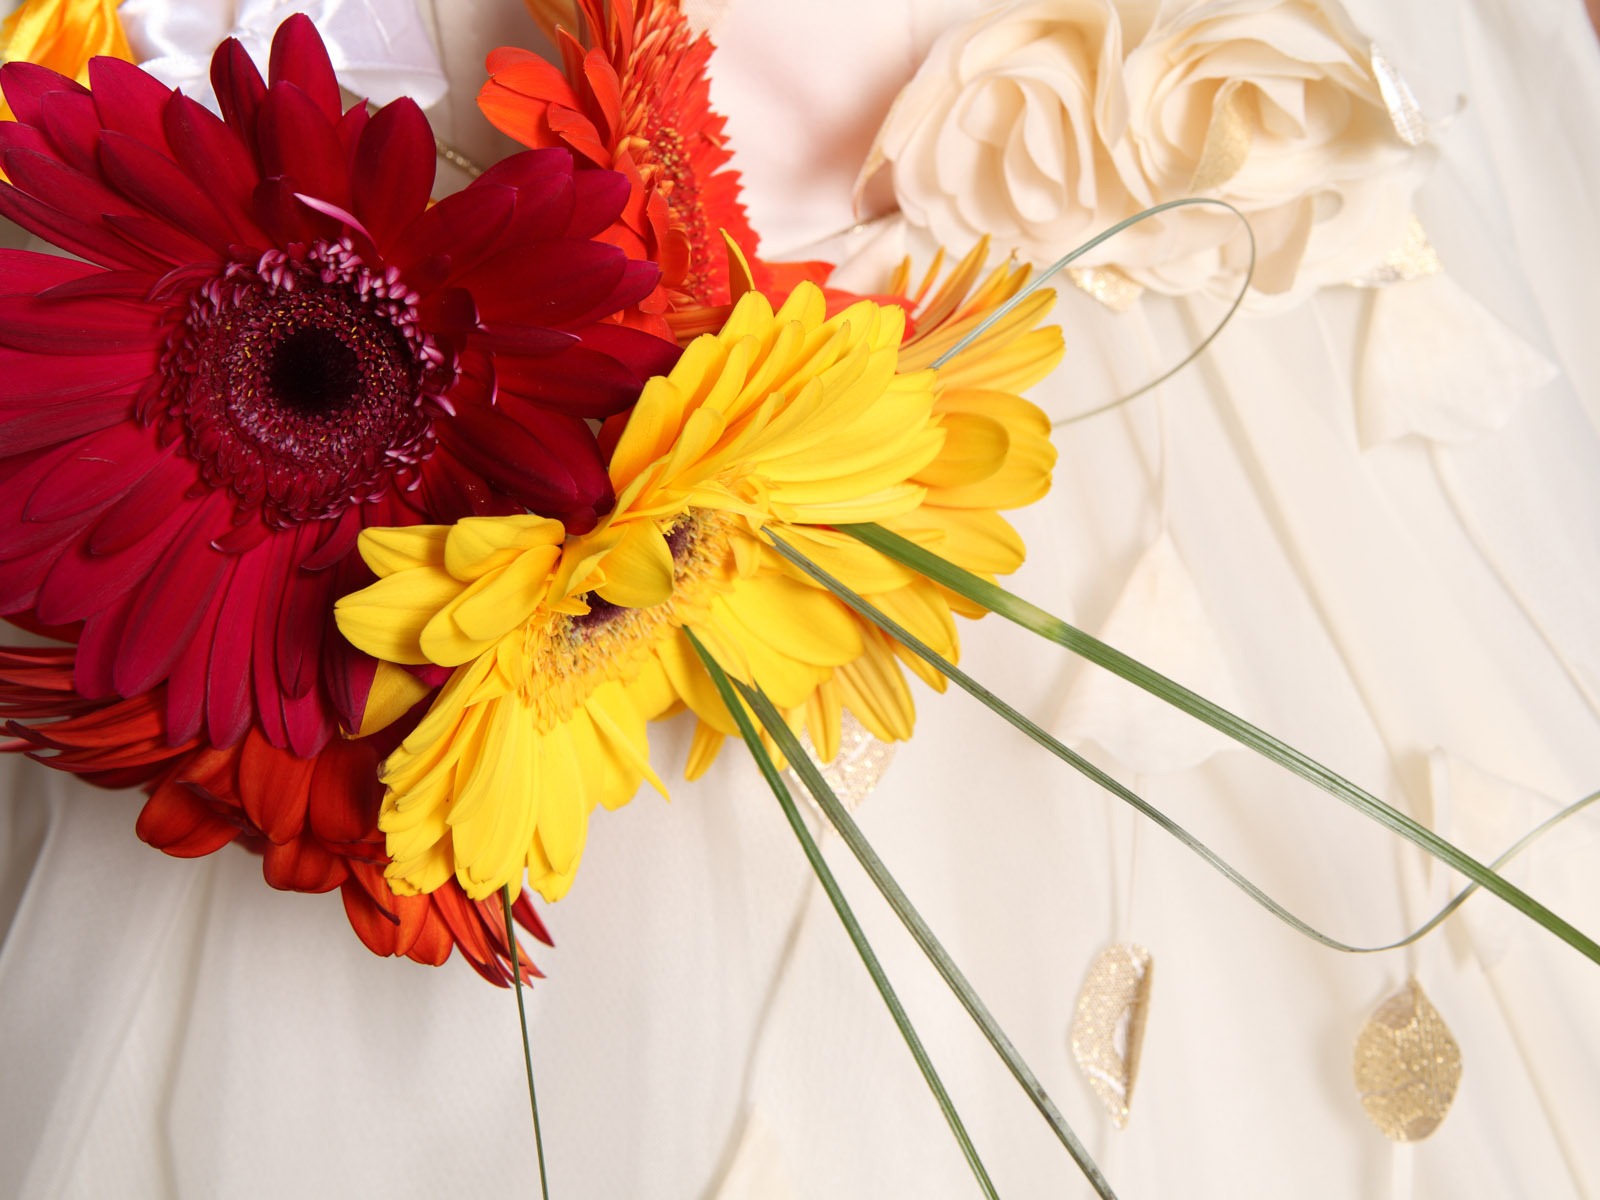 Weddings and Flowers wallpaper (2) #8 - 1600x1200